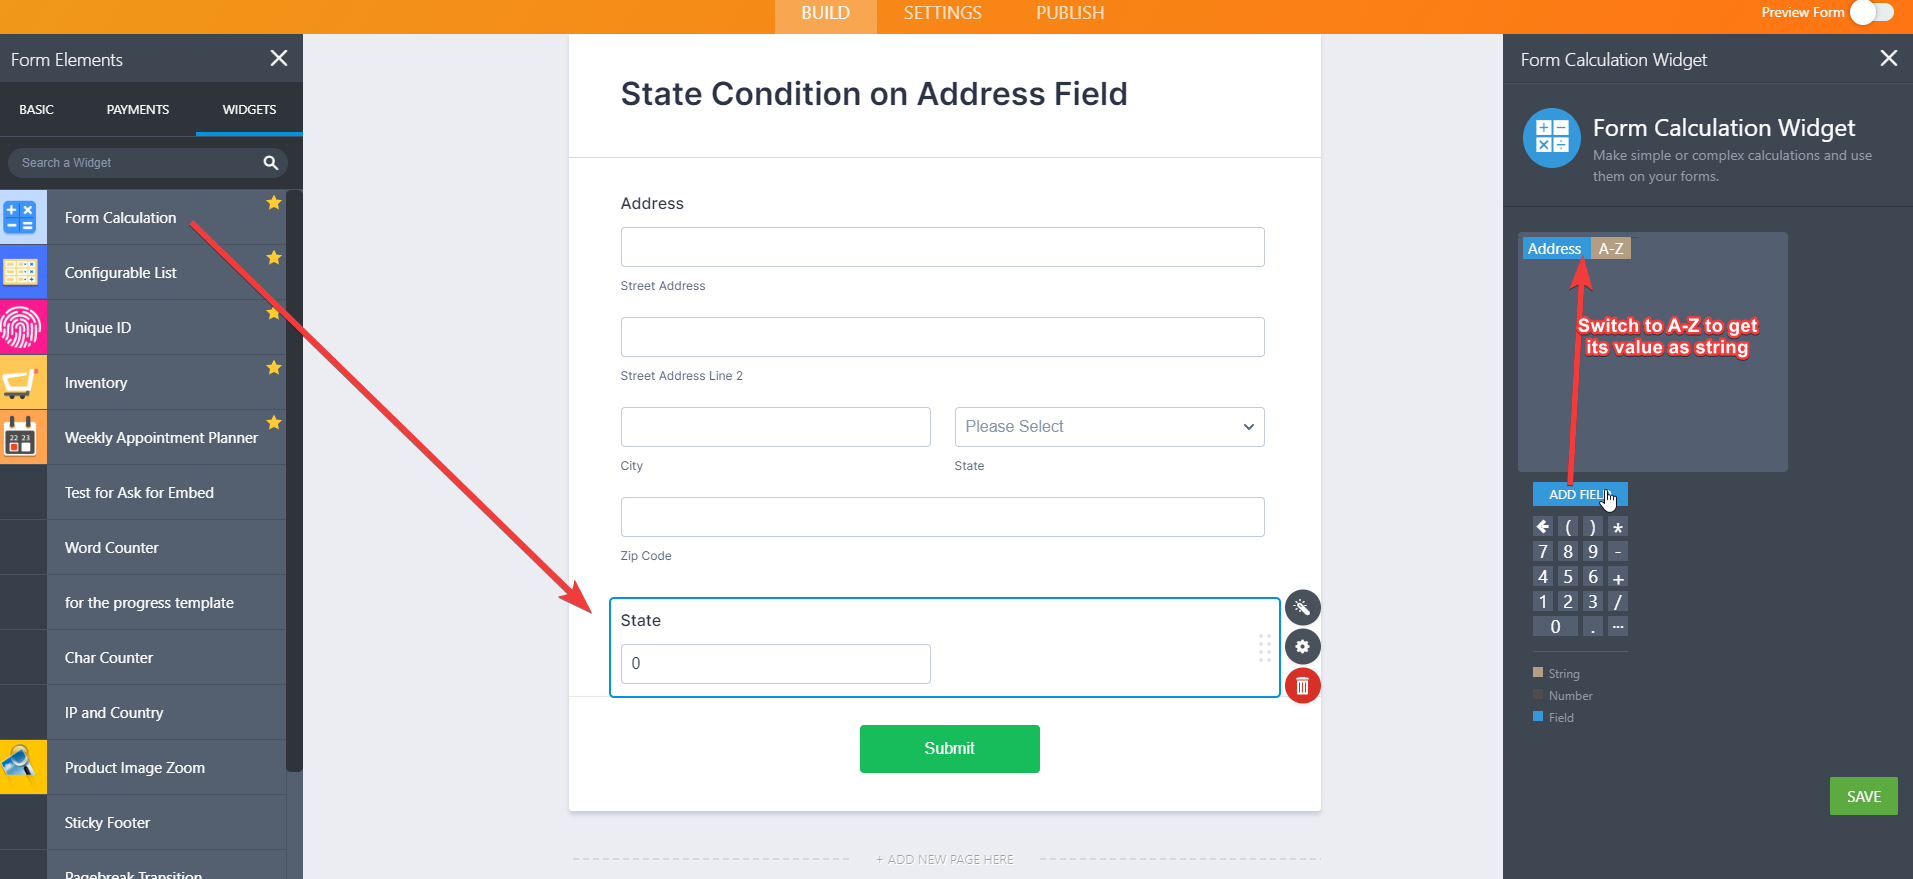 How to display a field based on the State in the address field? Image 1 Screenshot 30